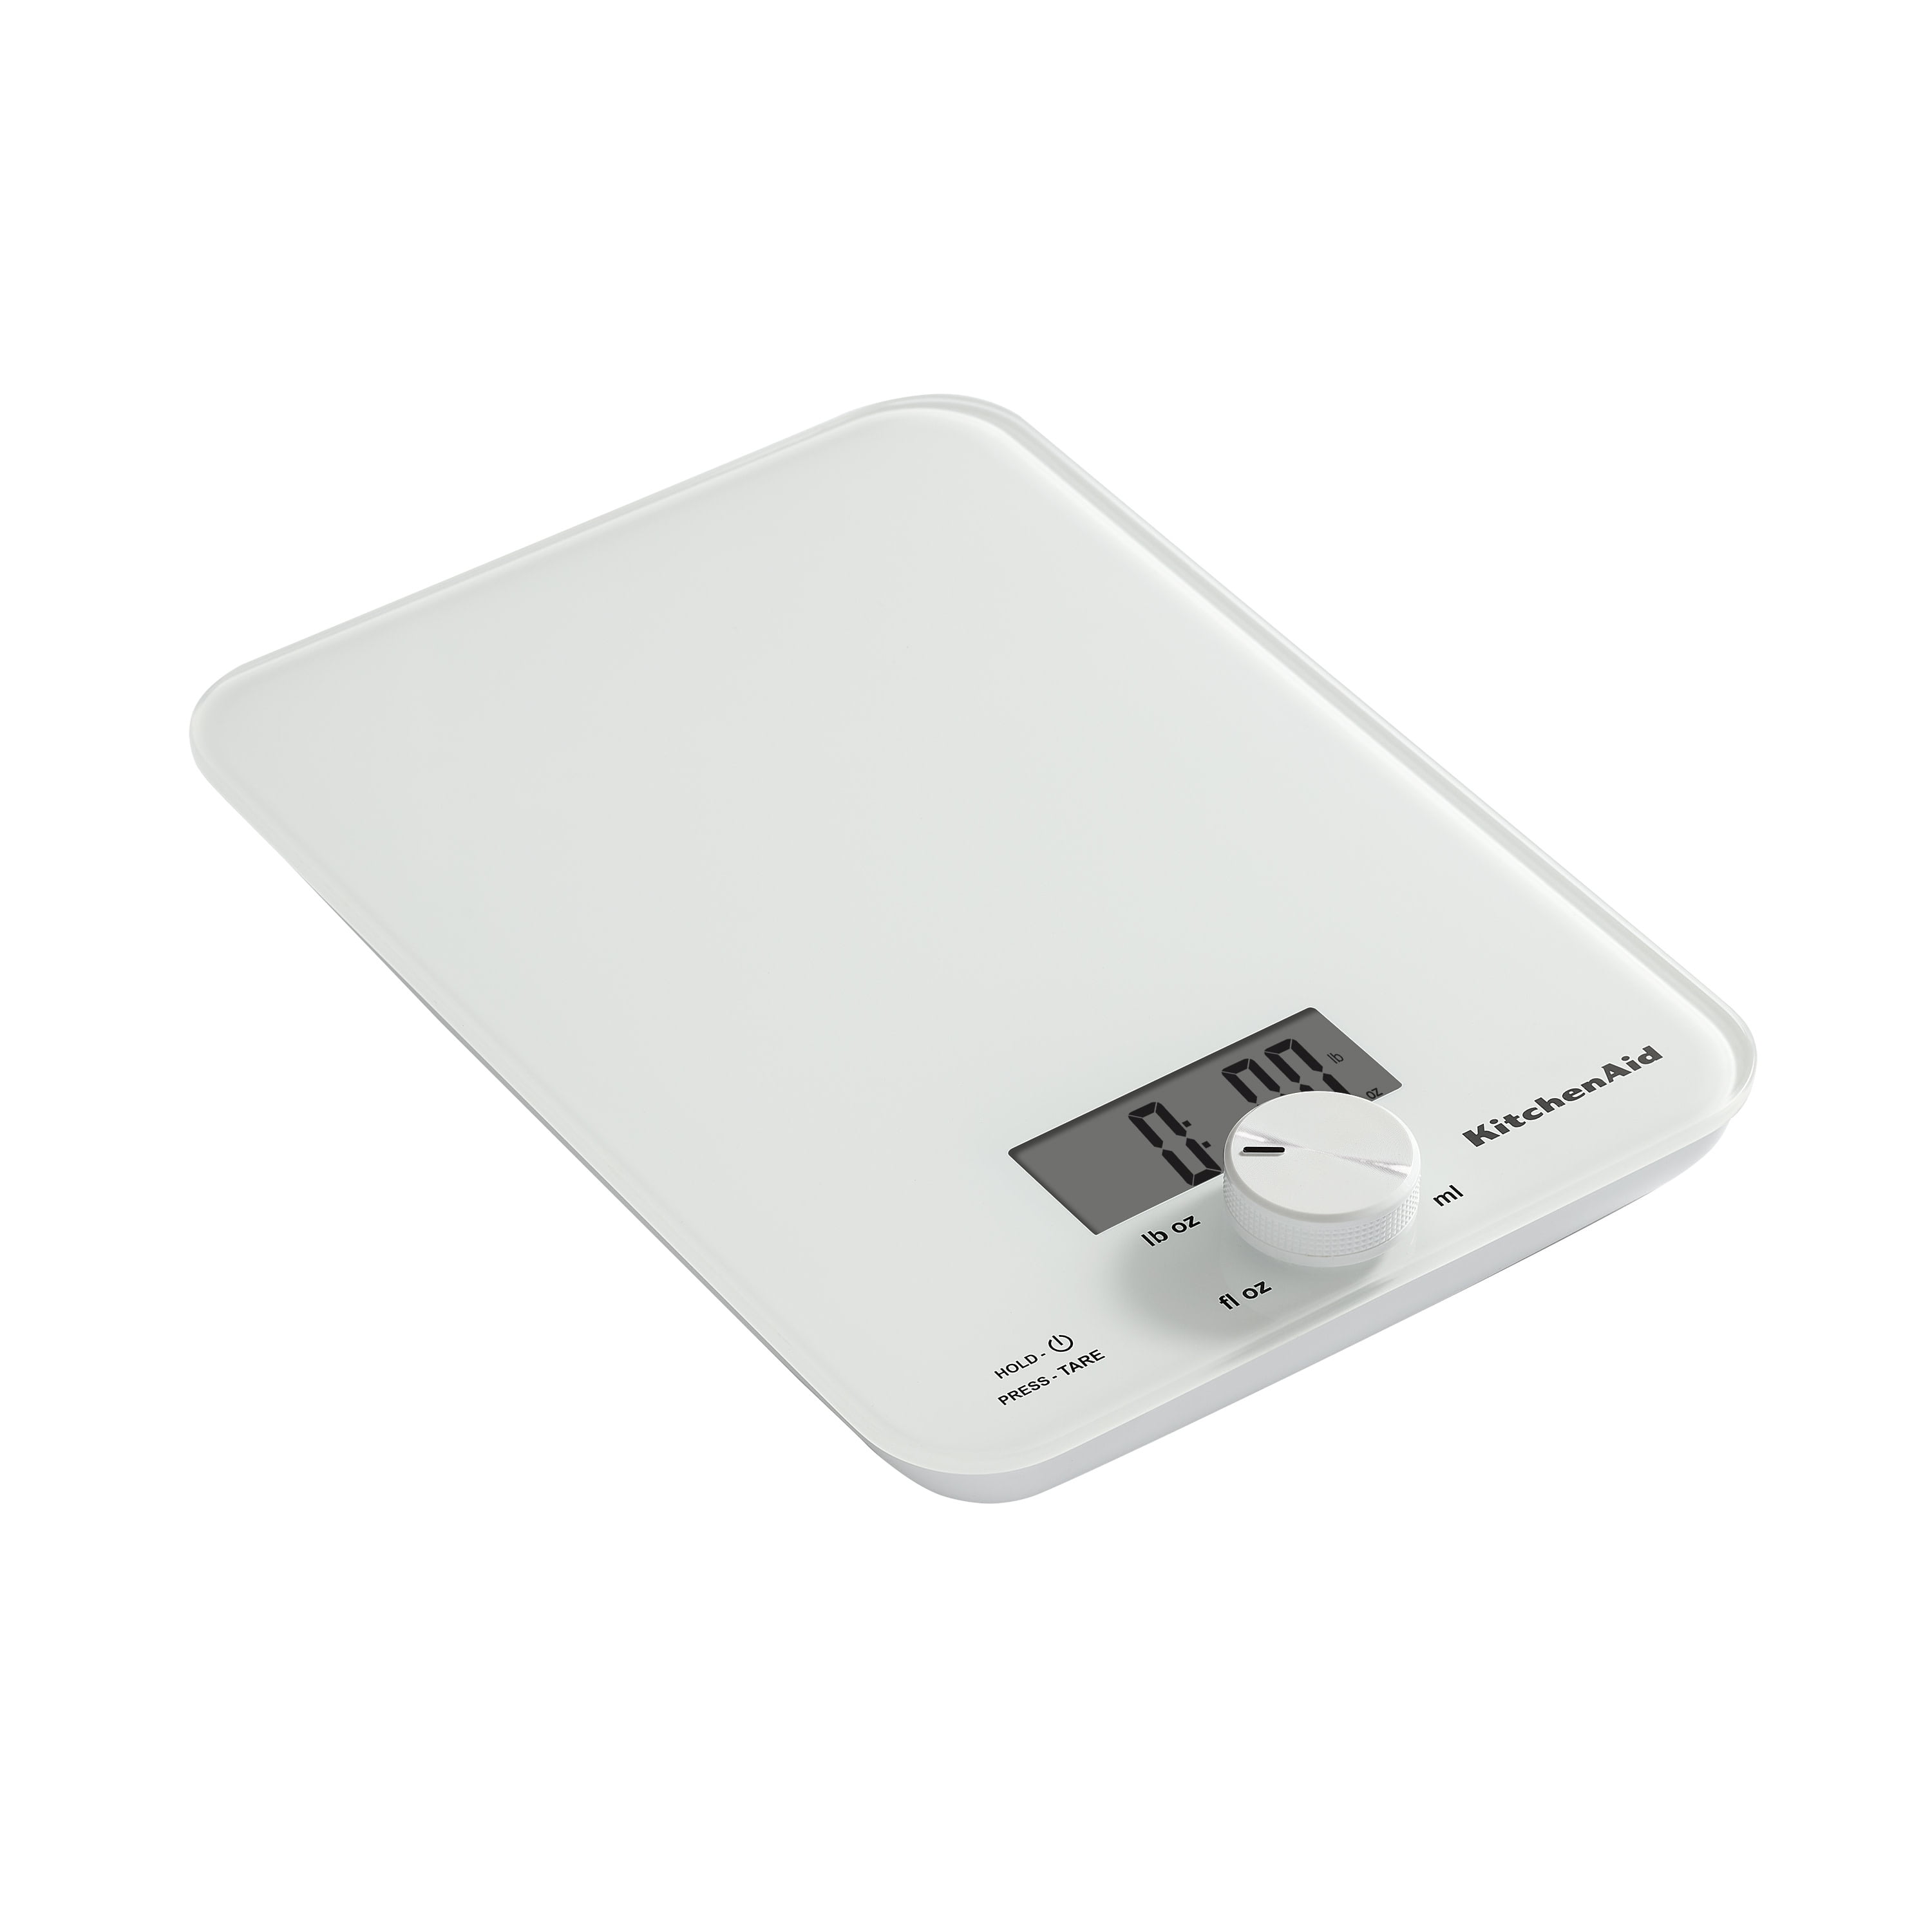 KitchenAid Gourmet Stainless Steel Electronic Scale